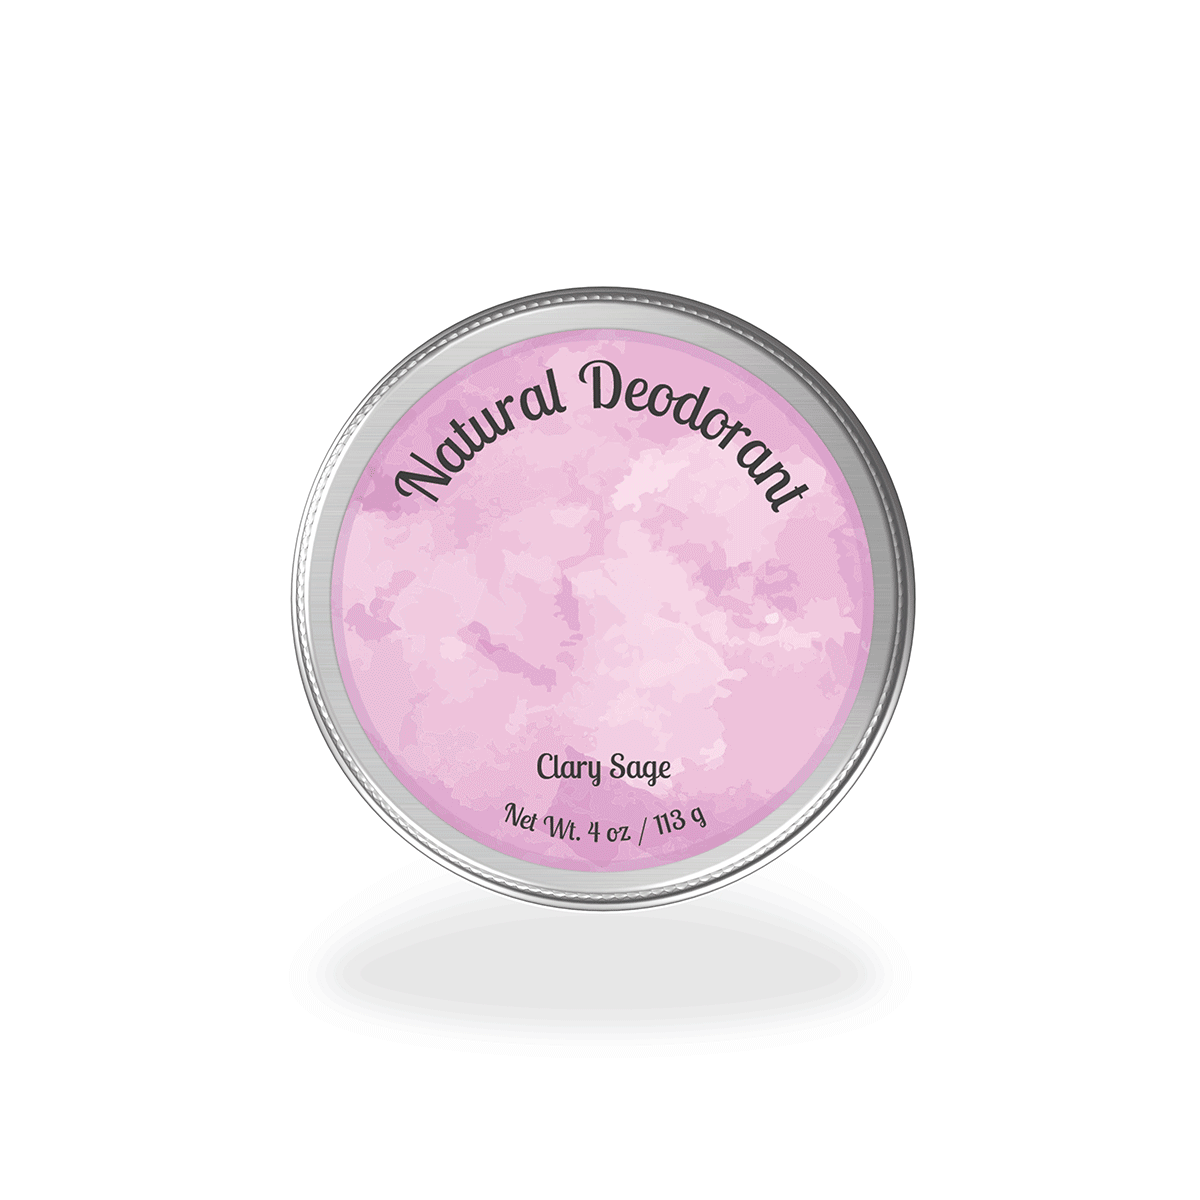 Natural Deodorant - Collection Skin Care Body Skin Care